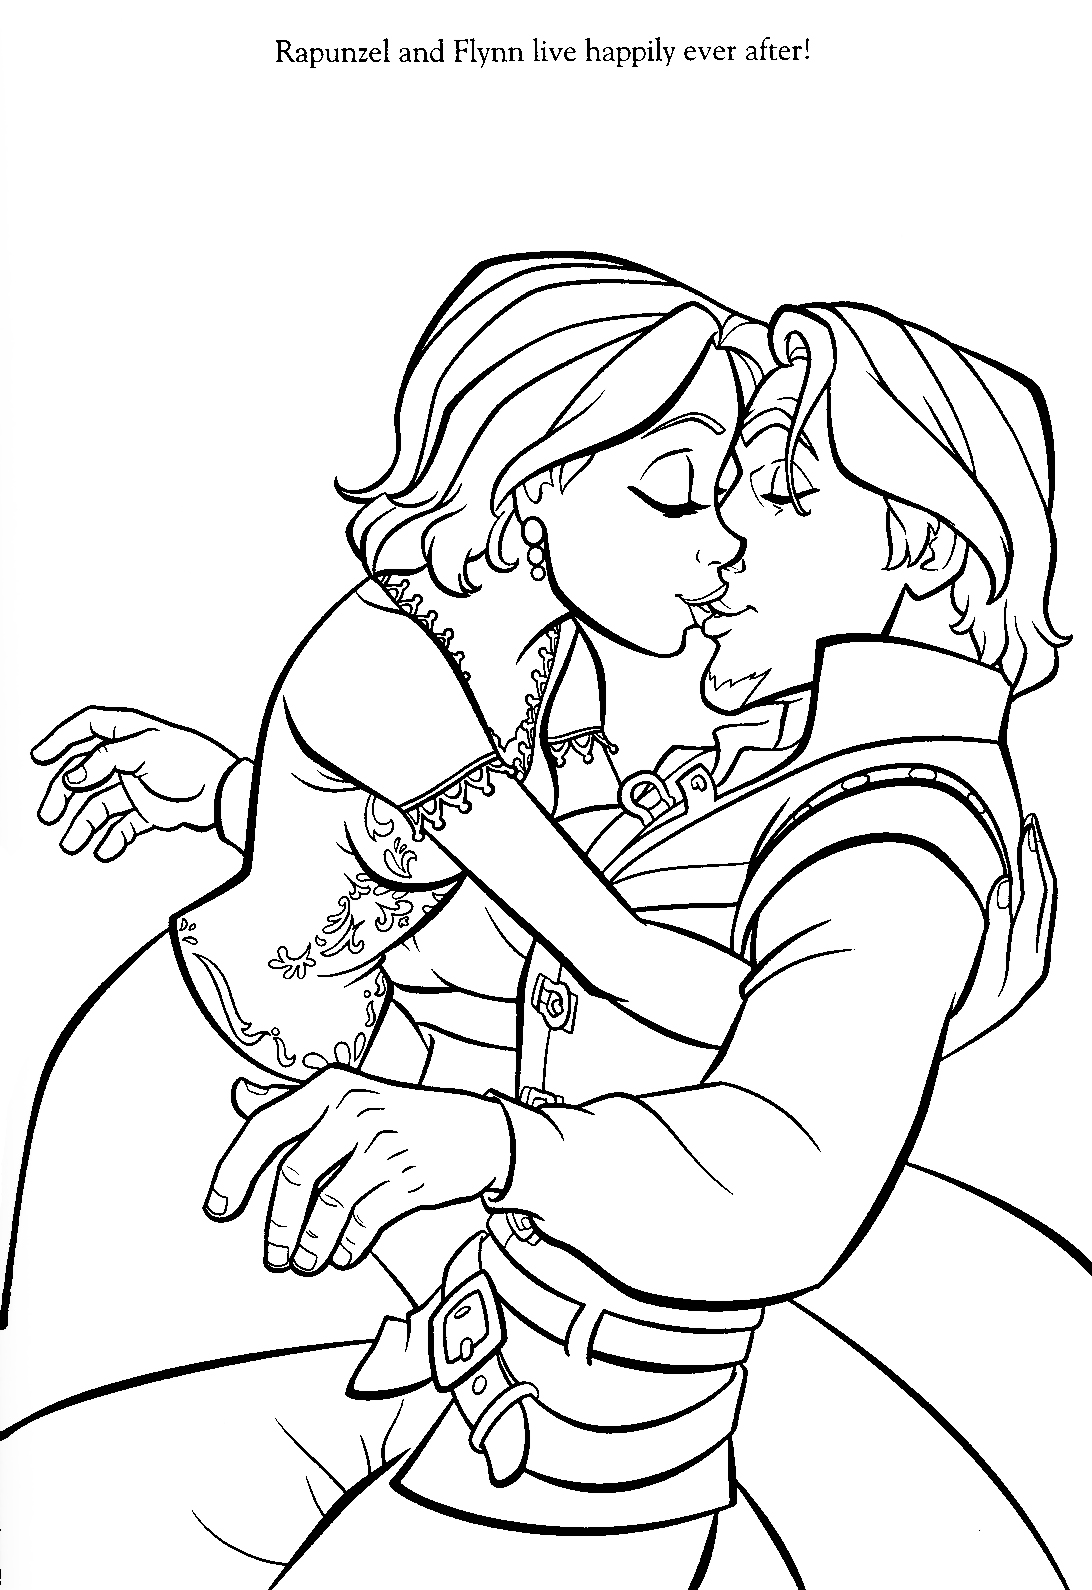 Rapunzel Coloring Pages - Best Coloring Pages For Kids